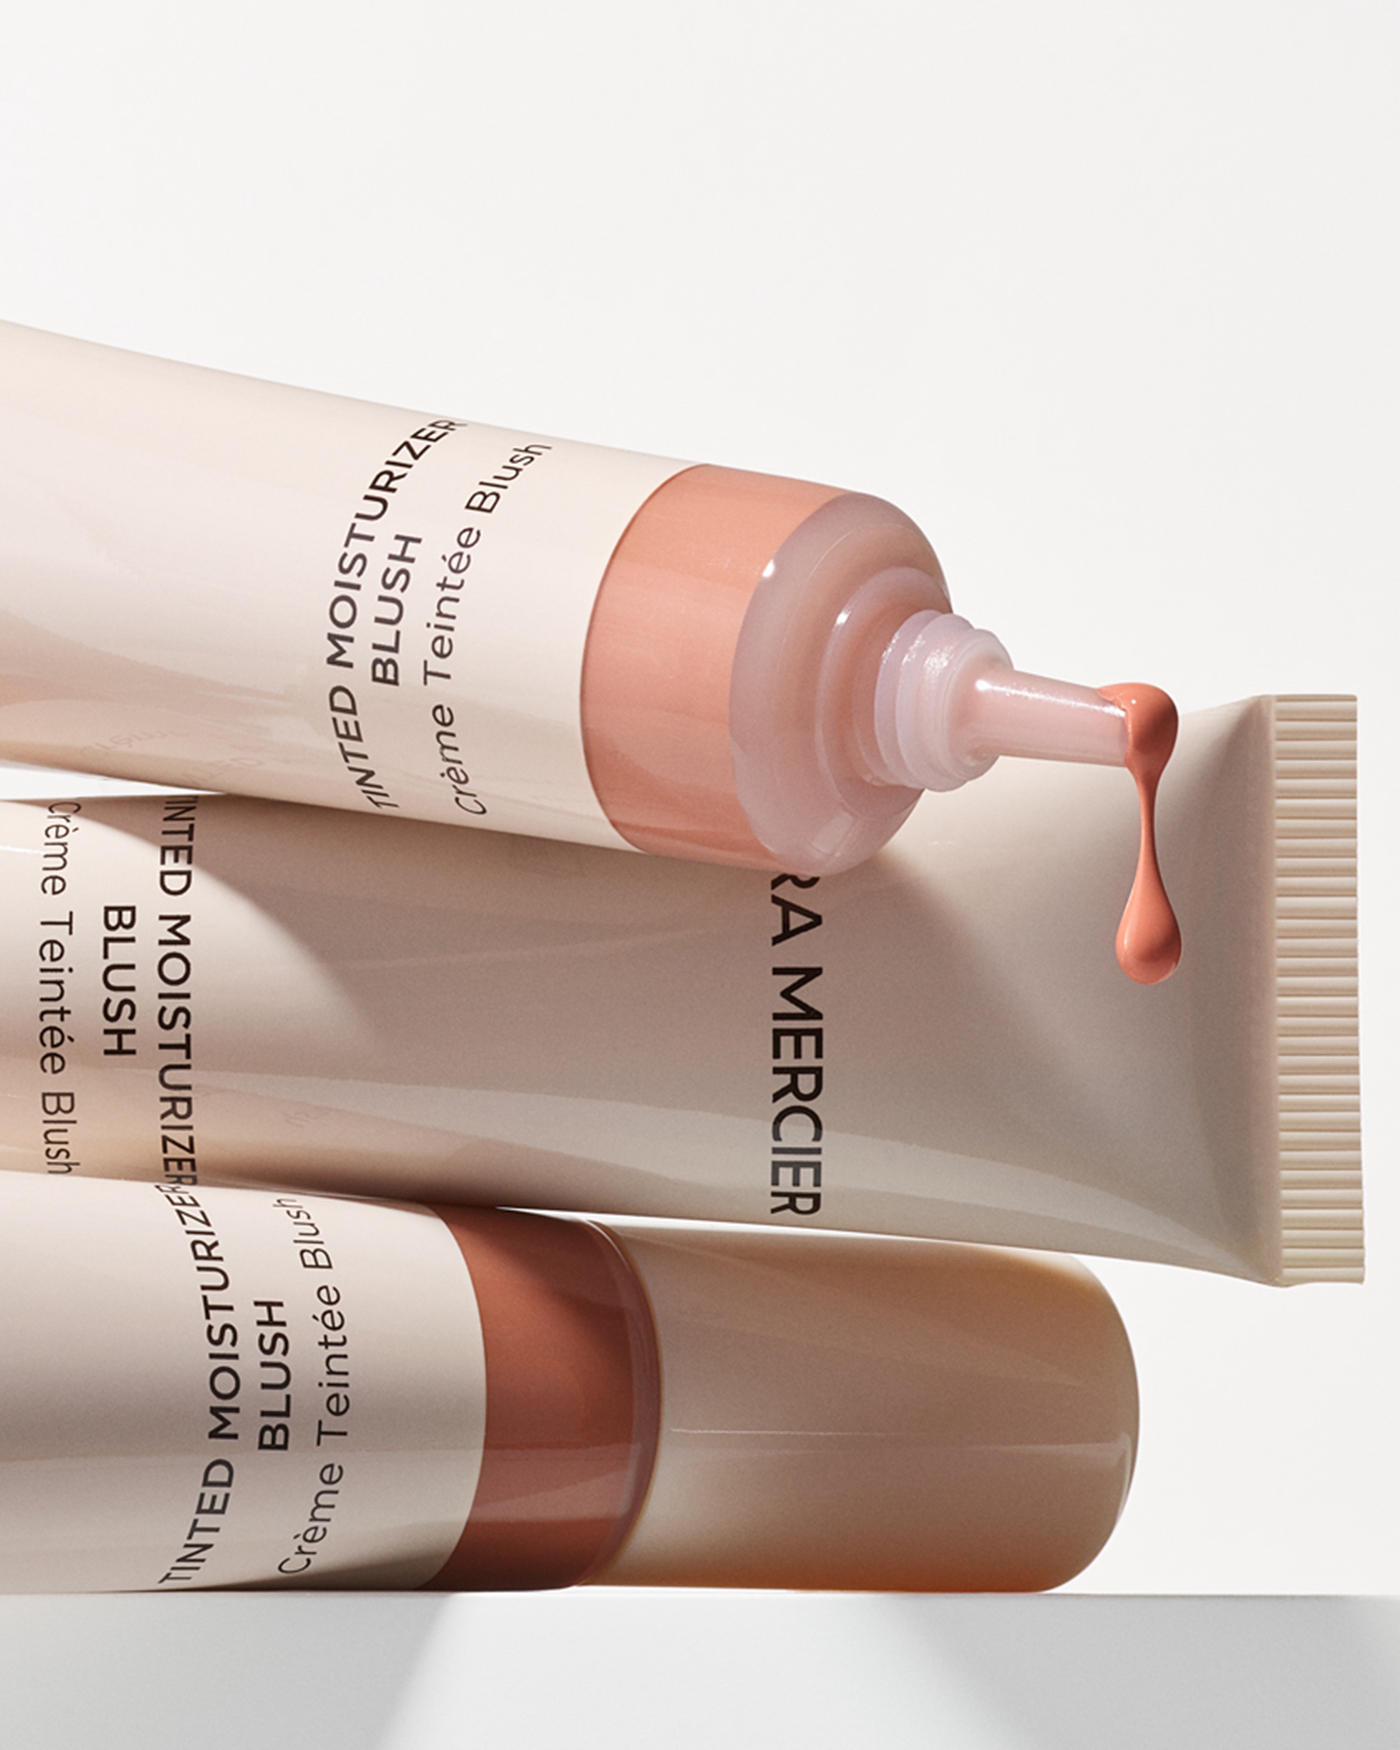 image  1 Laura Mercier - That soft, just-pinched glow